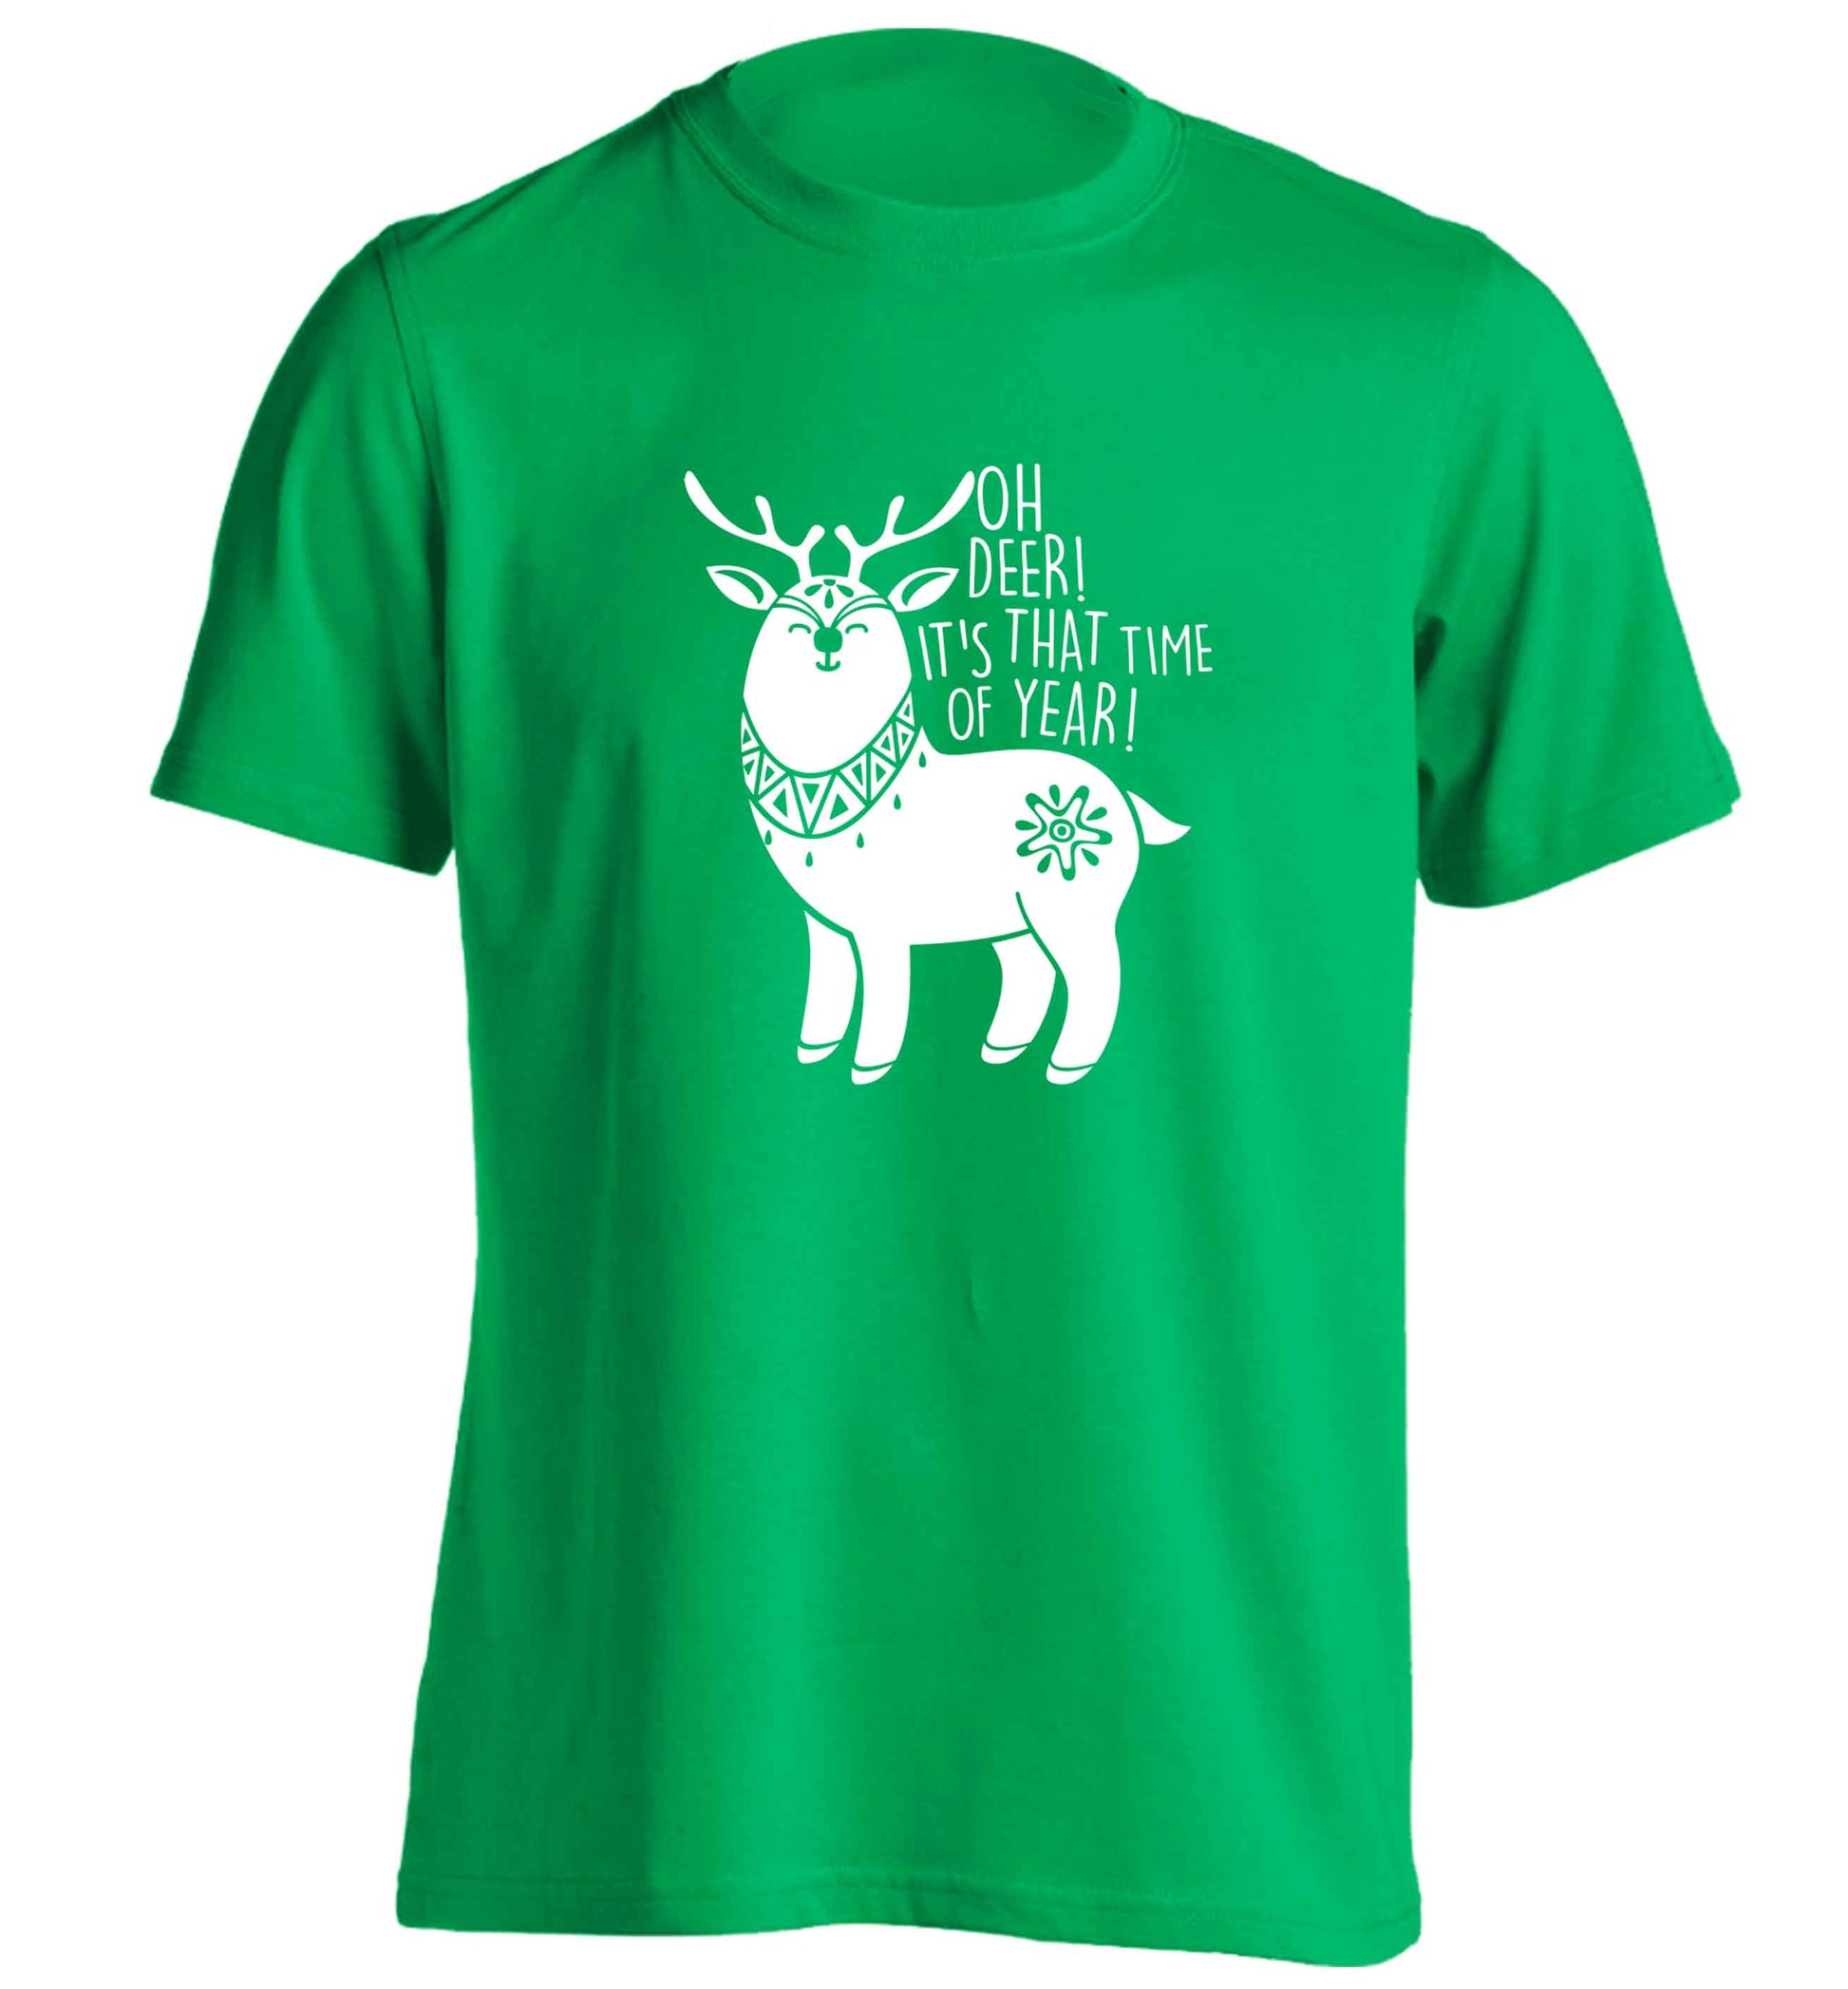 Oh dear it's that time of year adults unisex green Tshirt 2XL